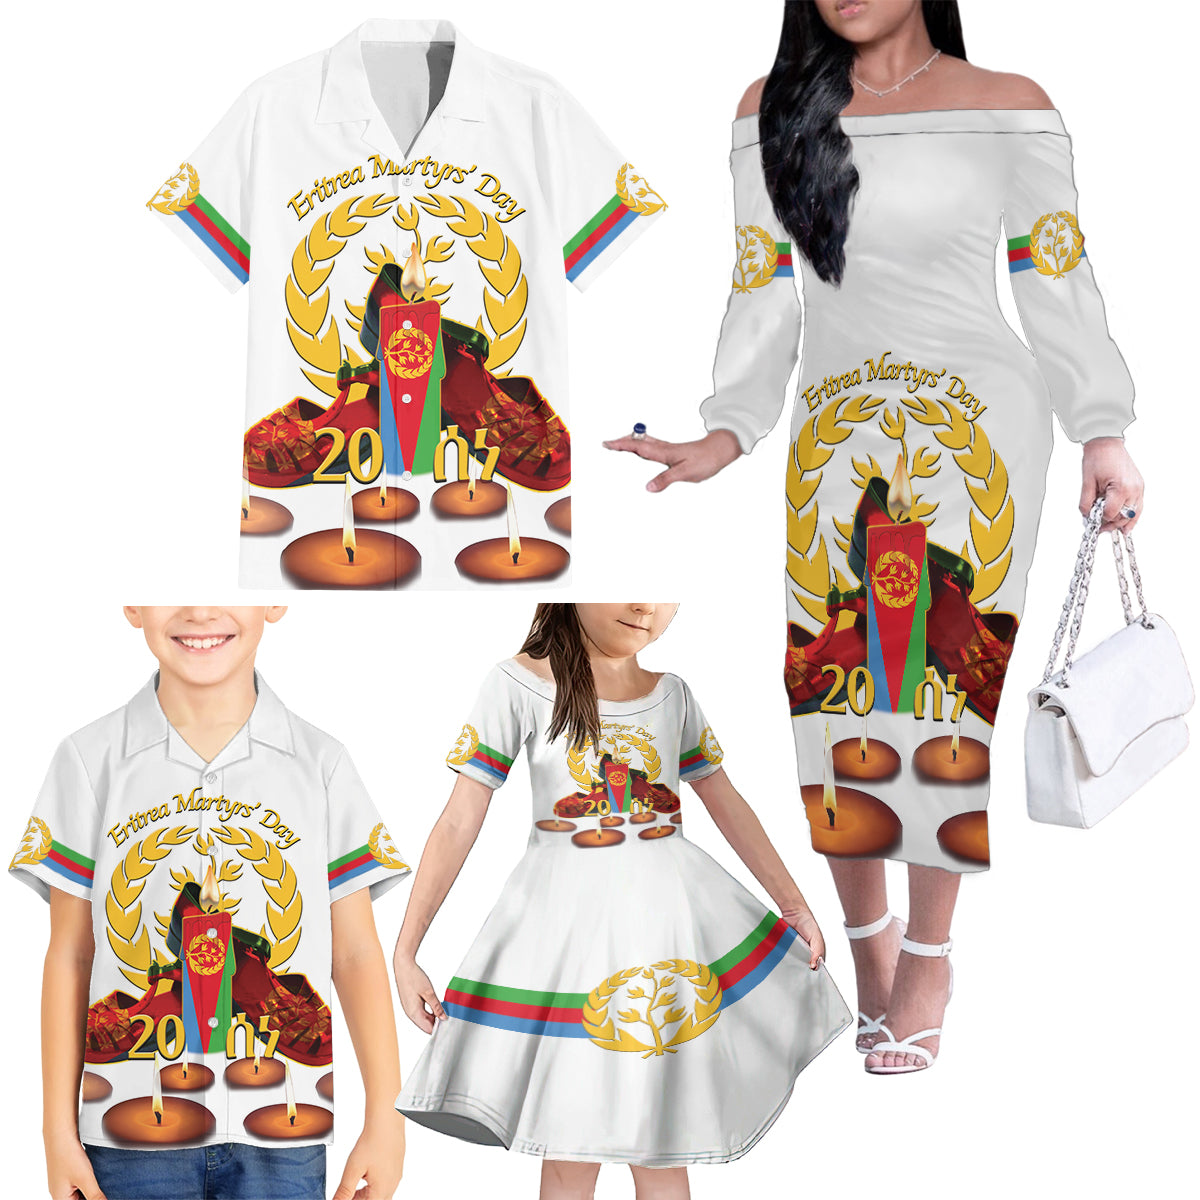 Custom Eritrea Martyrs' Day Family Matching Off The Shoulder Long Sleeve Dress and Hawaiian Shirt 20 June Shida Shoes With Candles - White